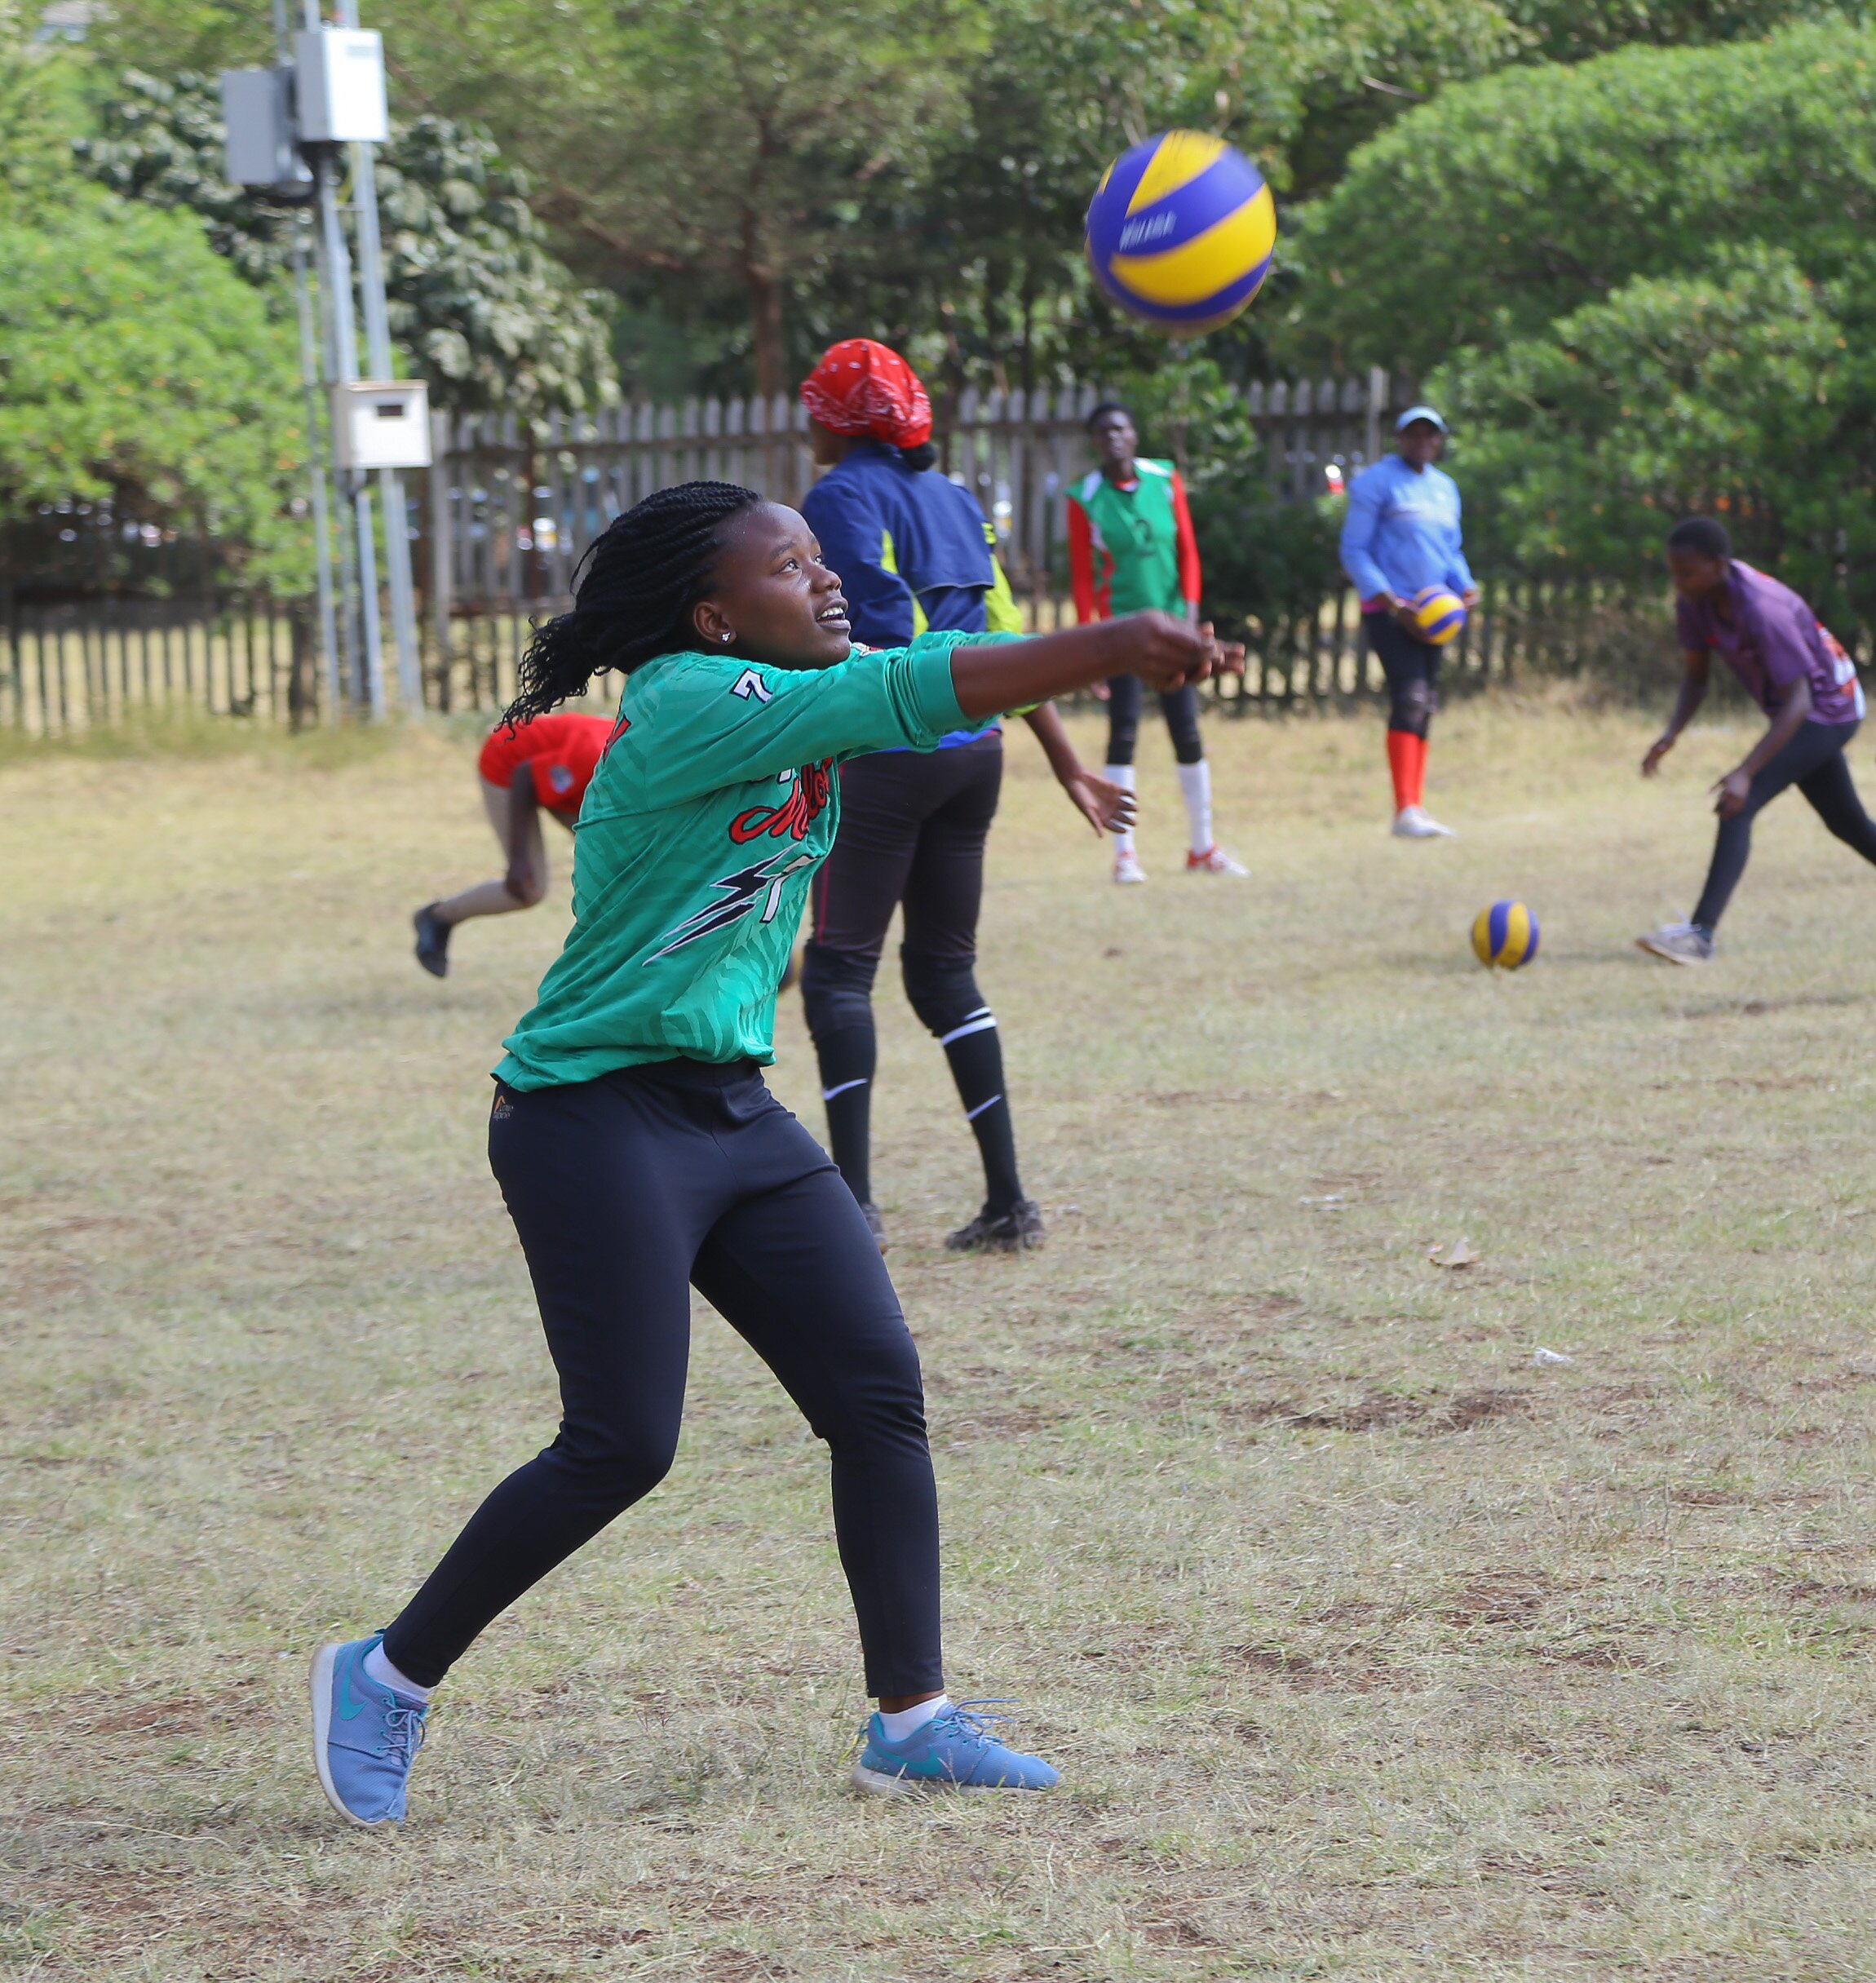 Lucky Junior, warms up with a Volleyball during the training at Railways club hoping to join KCB